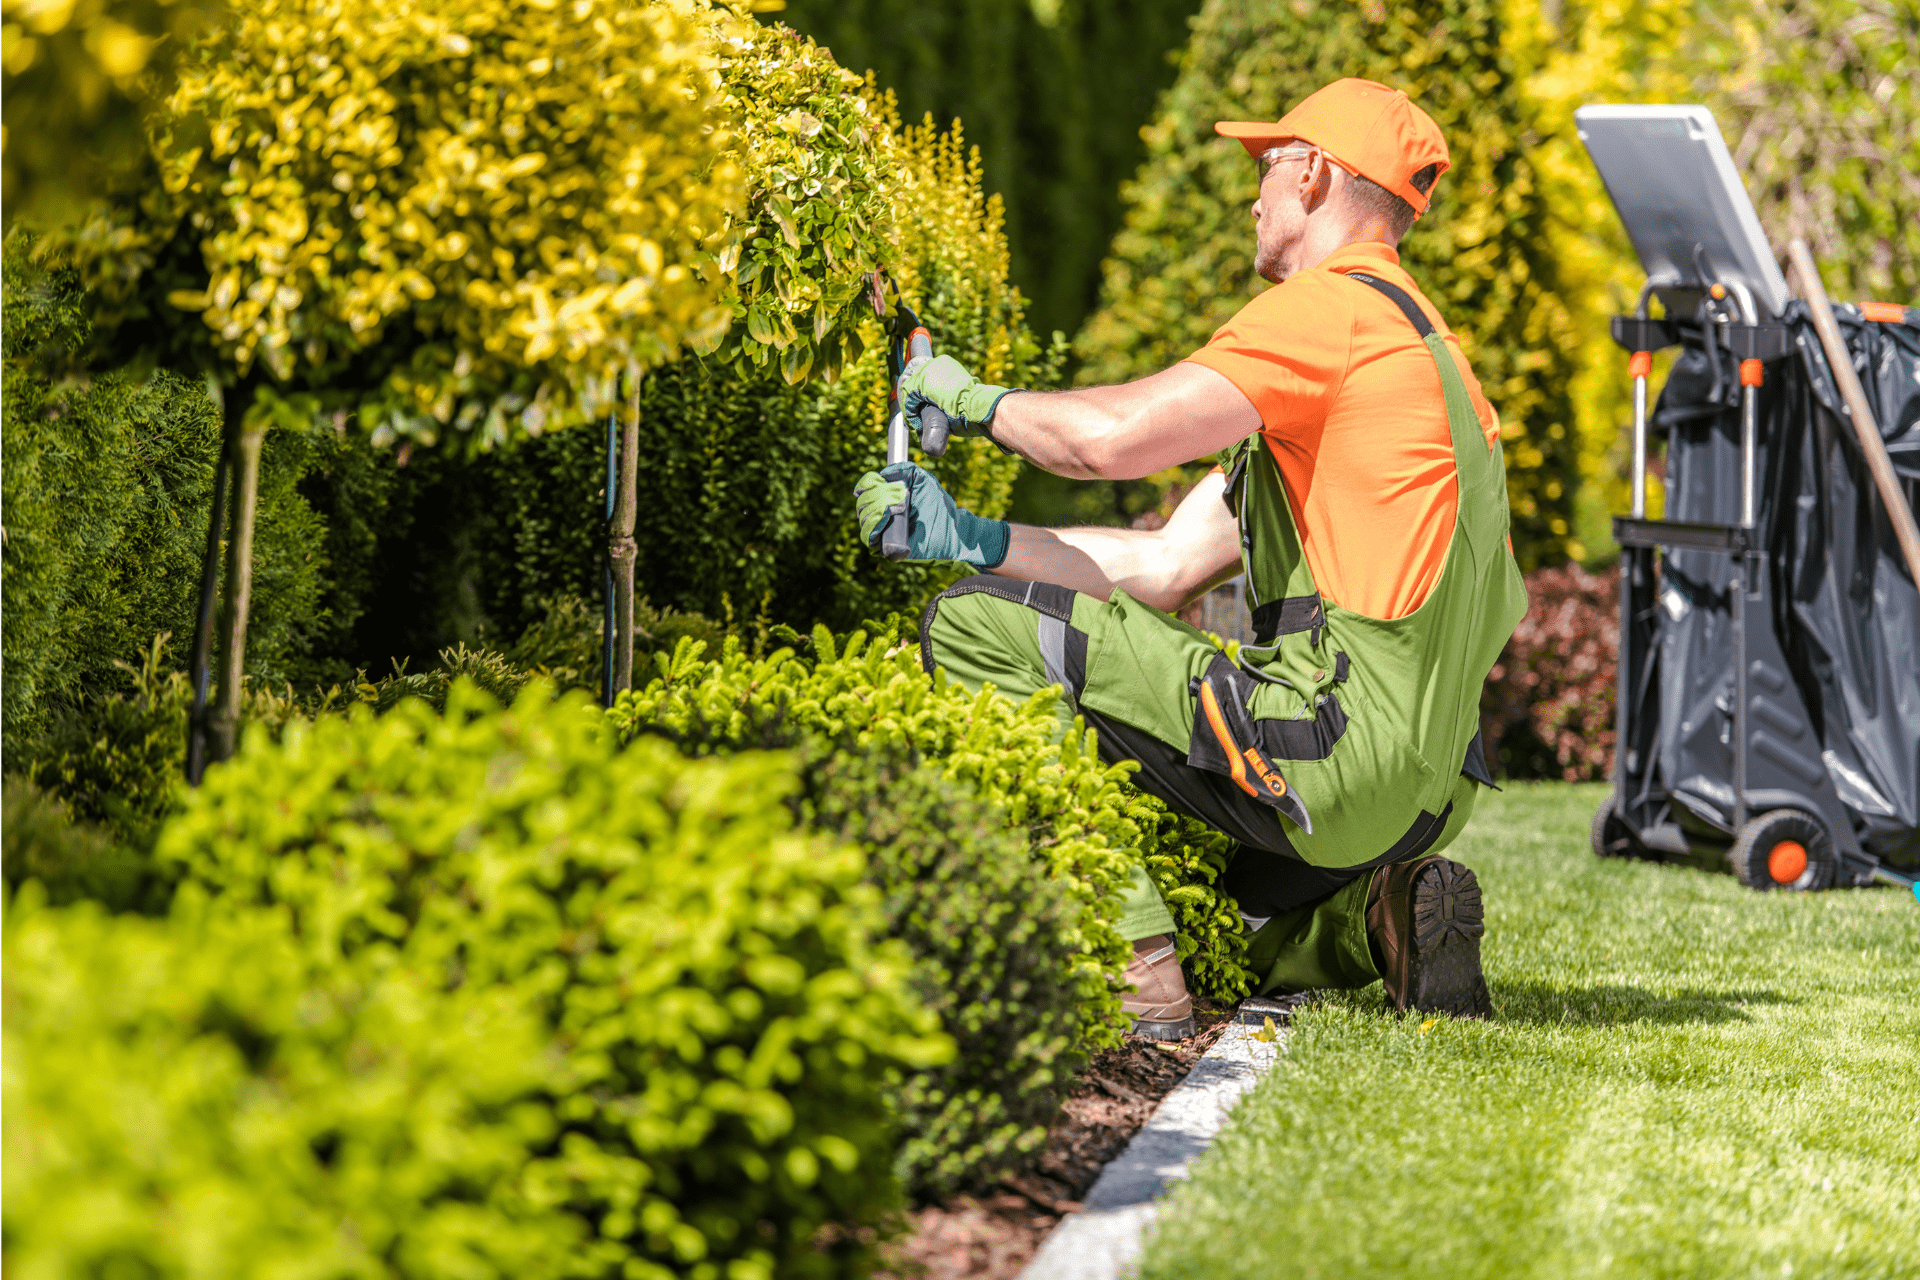 Landscaper in Boise, Idaho trimming plants with a pair of shears